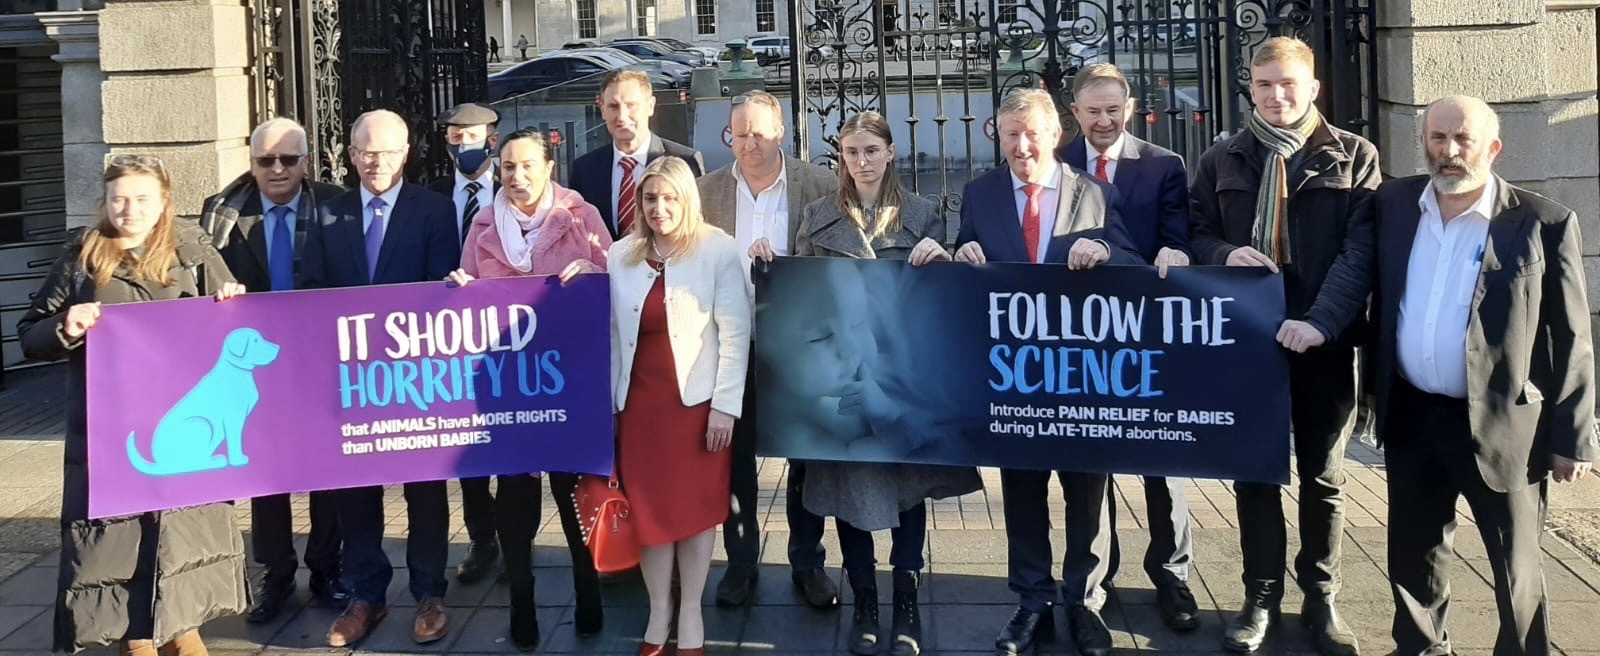 15.12.2021- News Release: Government knows momentum is growing for ‘Foetal Pain Relief Bill’, says PLC